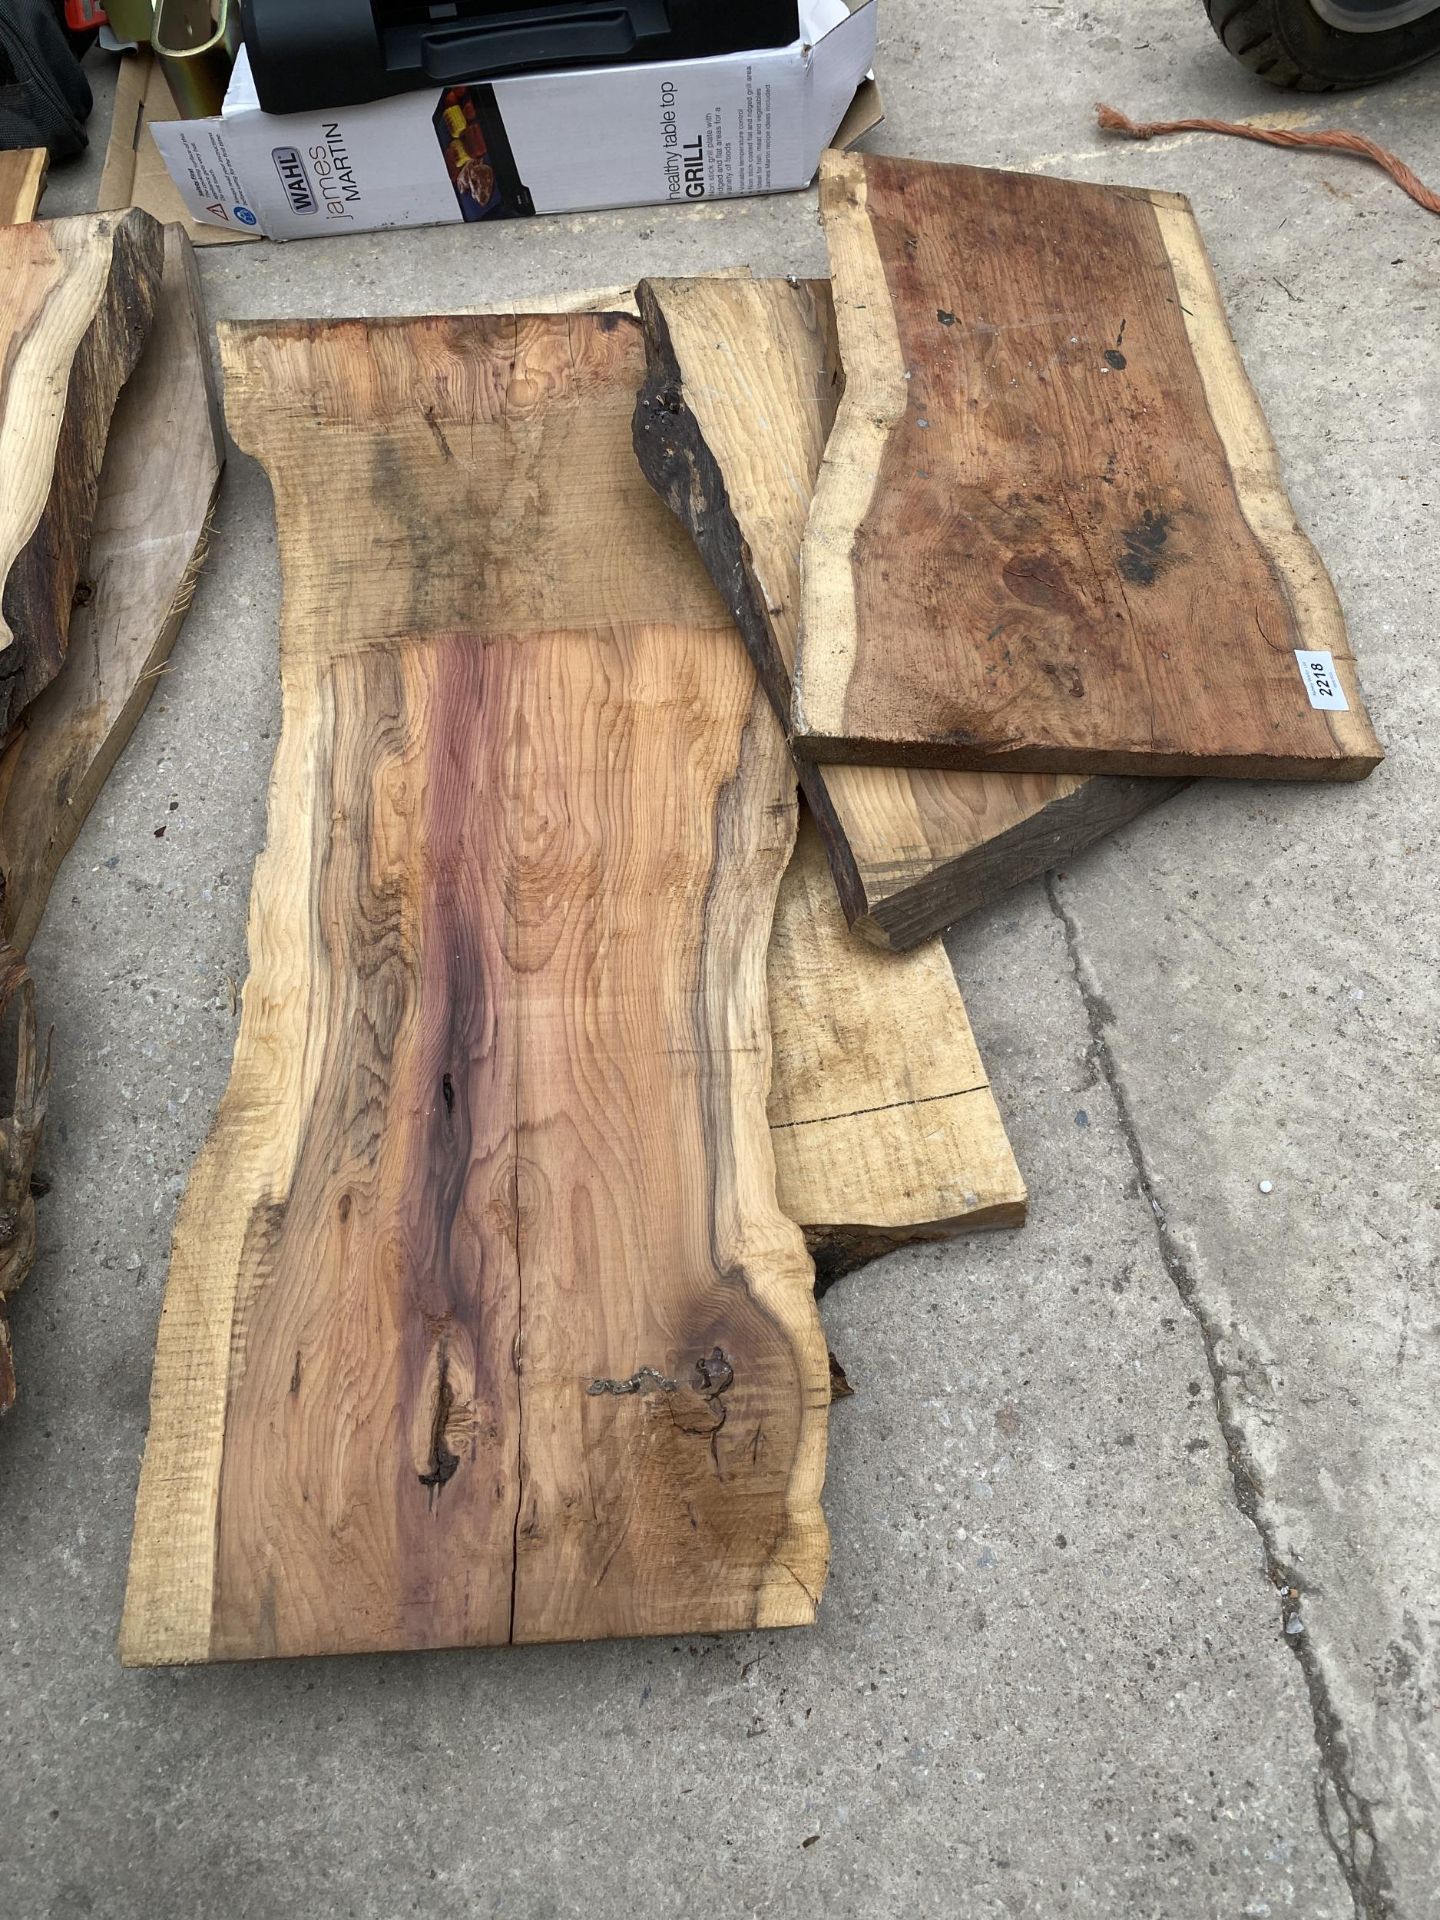 FOUR SMALL PIECES OF ROUGH SAWN YEW WOOD